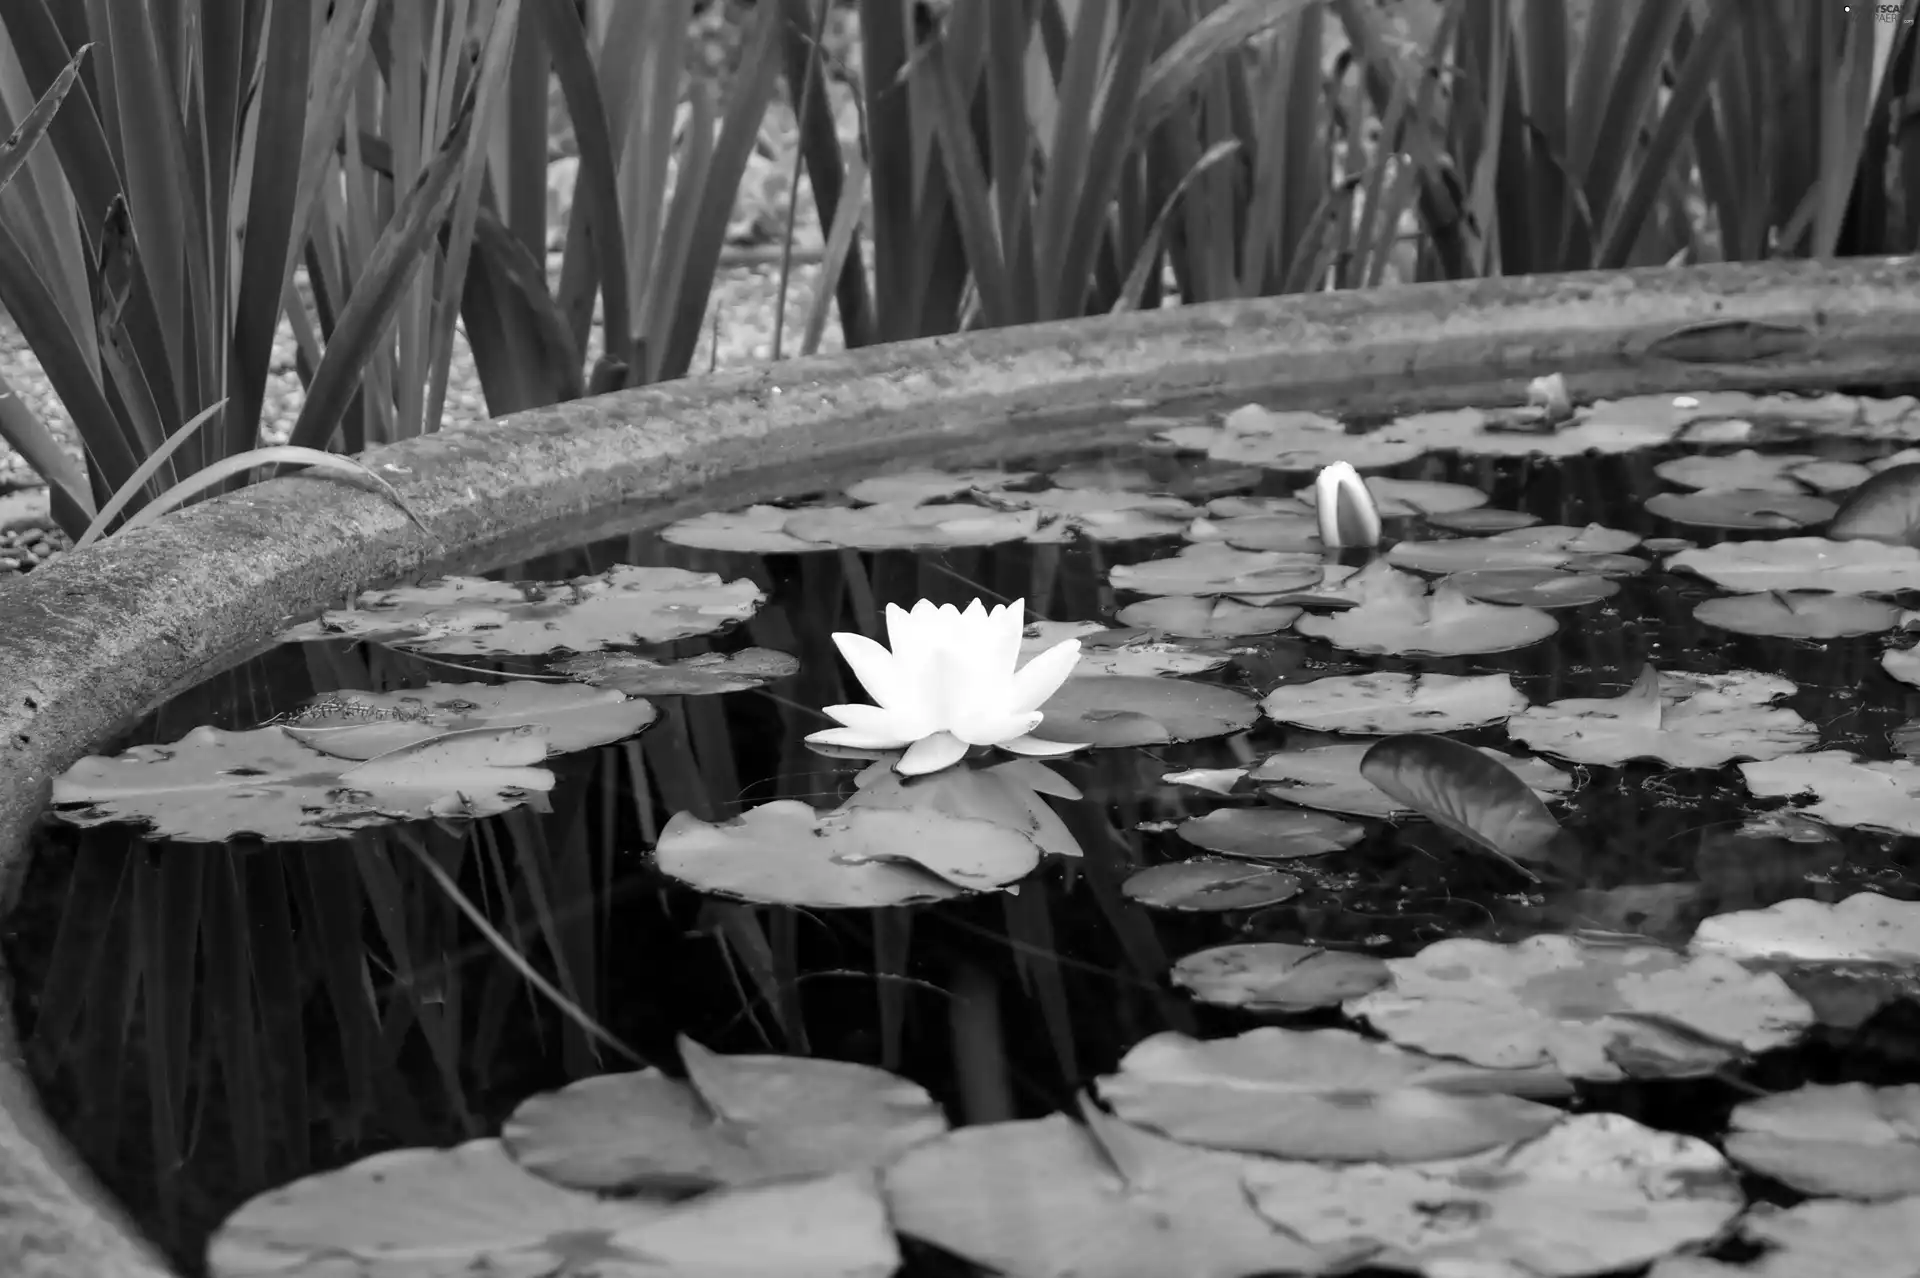 water, White, Lily